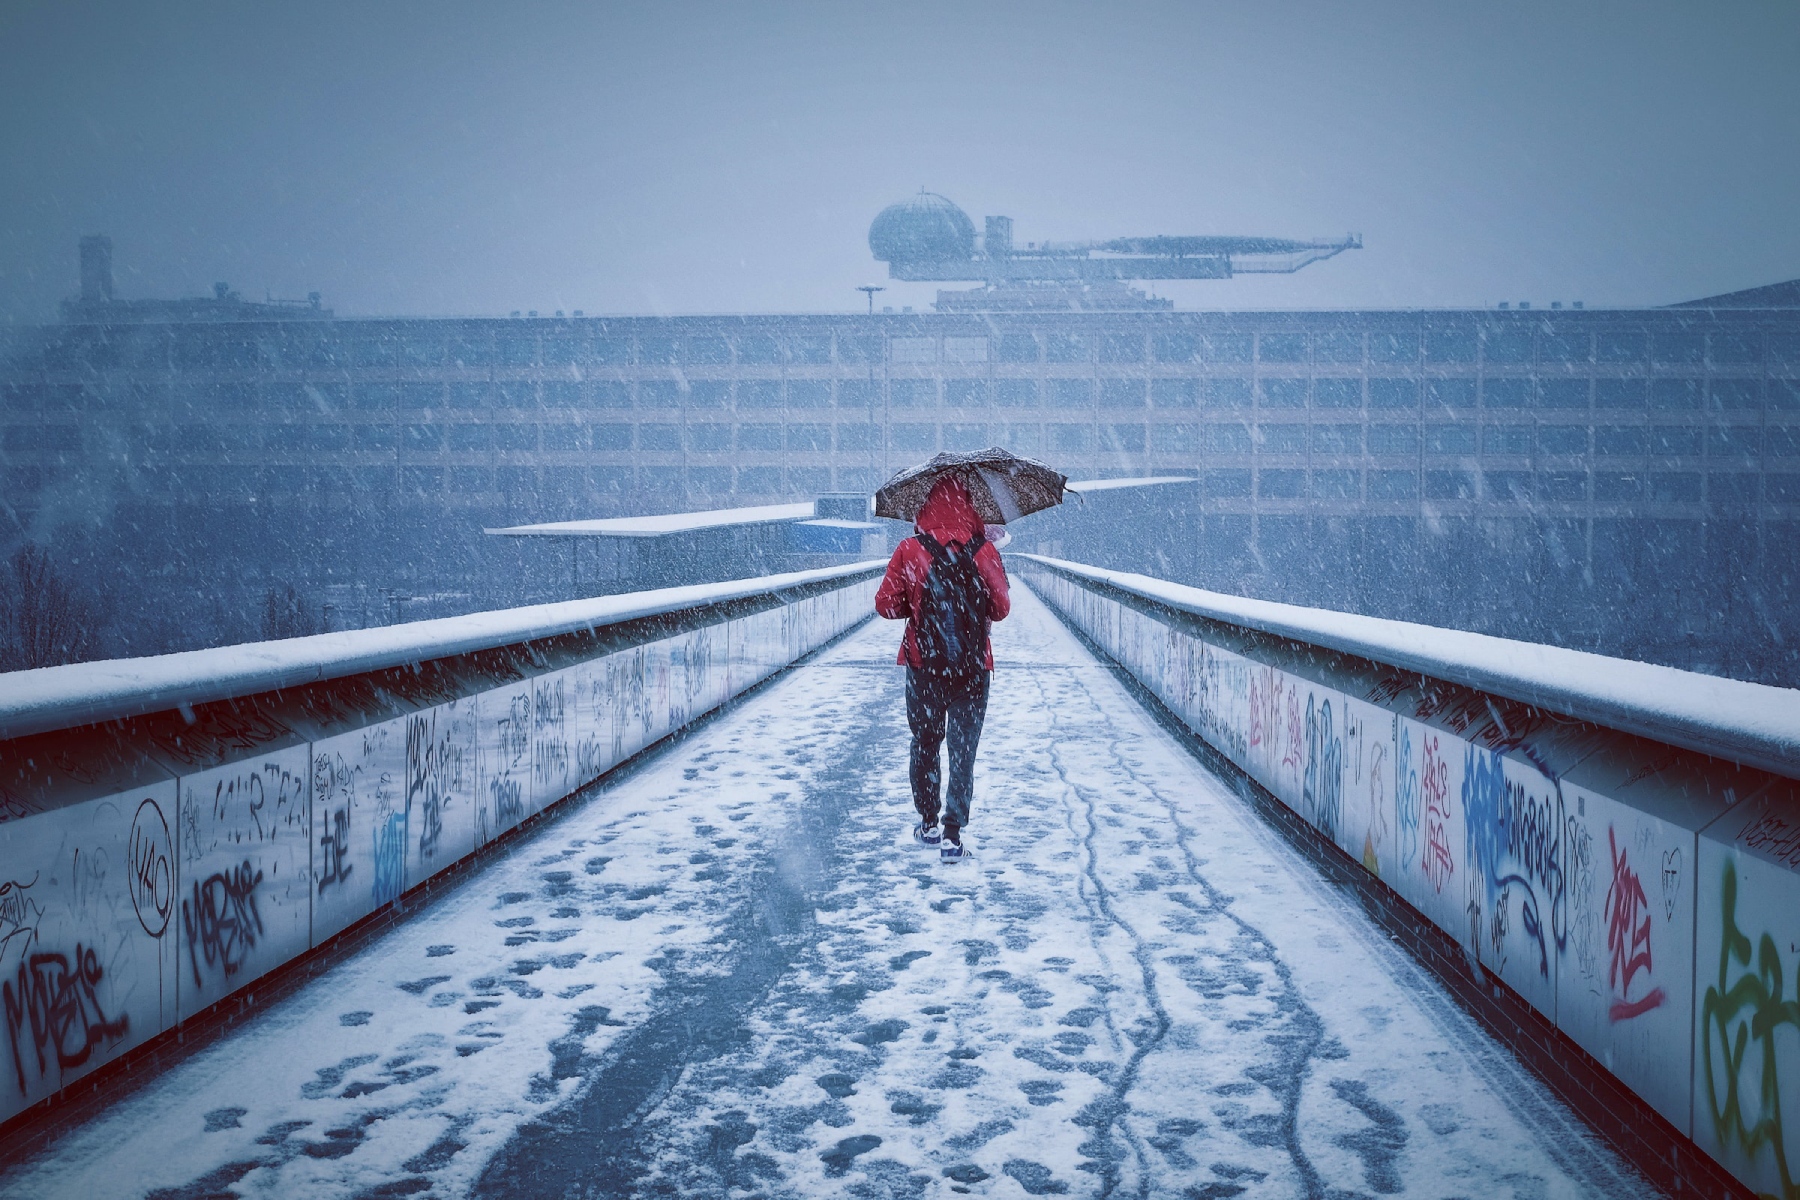 Person walking through snowfall in Turin, with colorful graffiti on both sides of the bridge